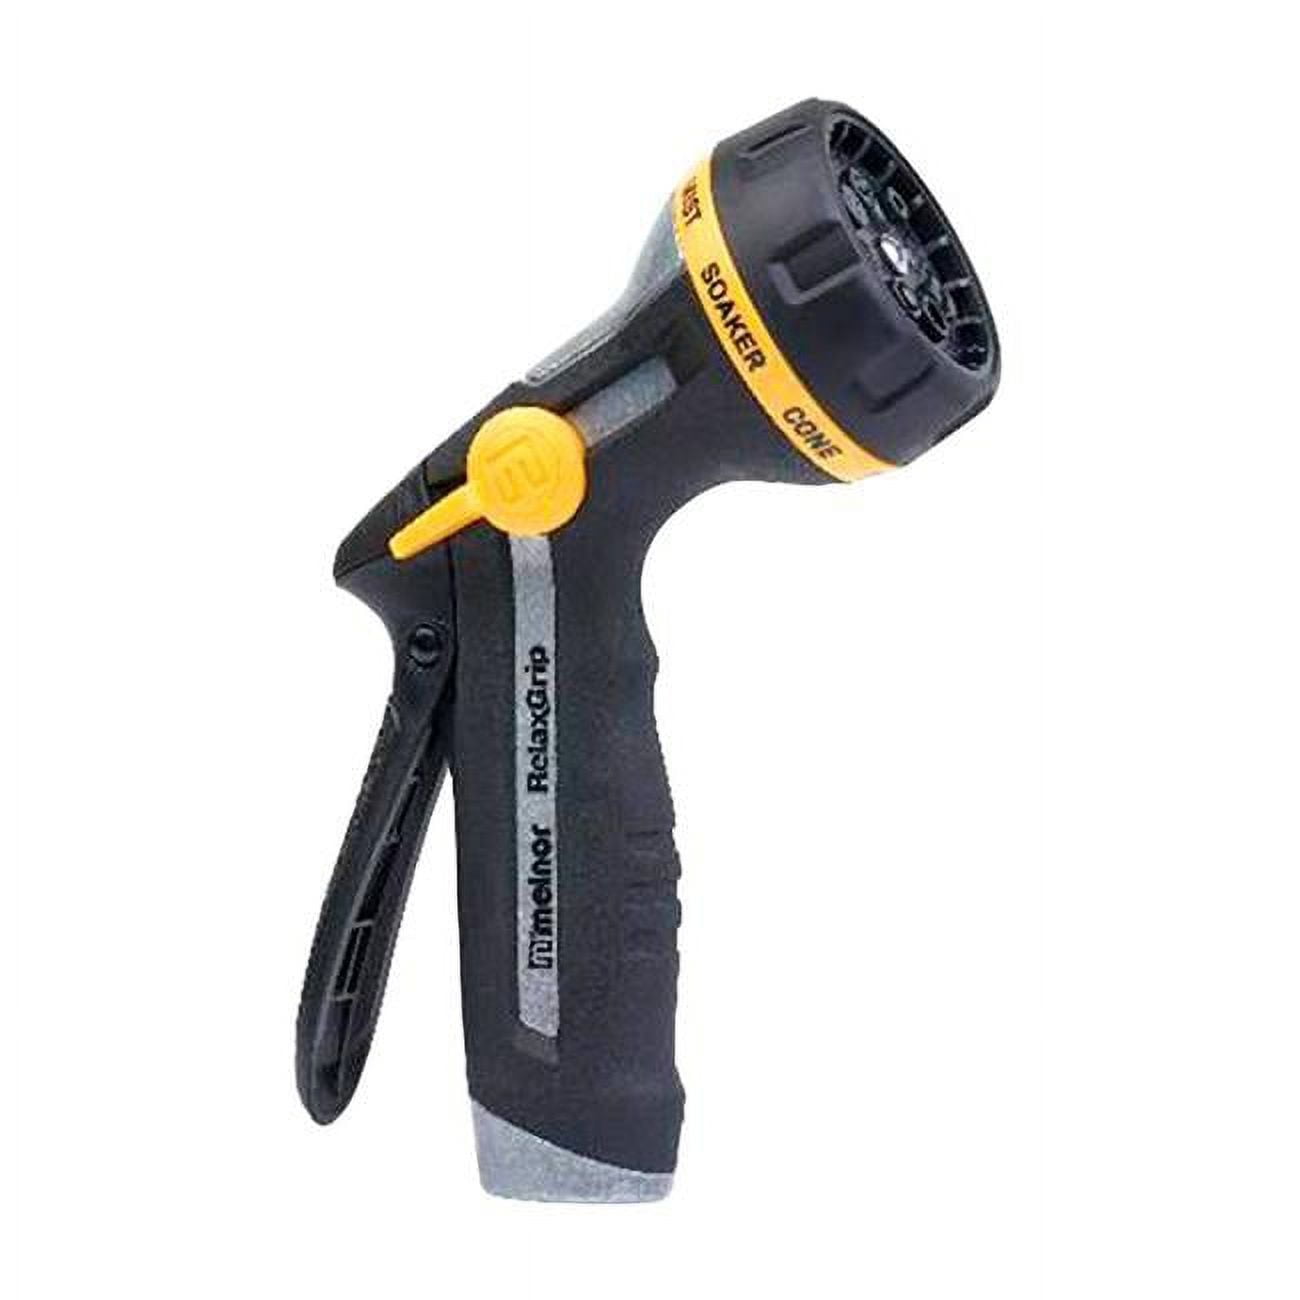 Picture of Melnor 7803141 8 Pattern Adjustable Metal Hose Nozzle - Black & Yellow